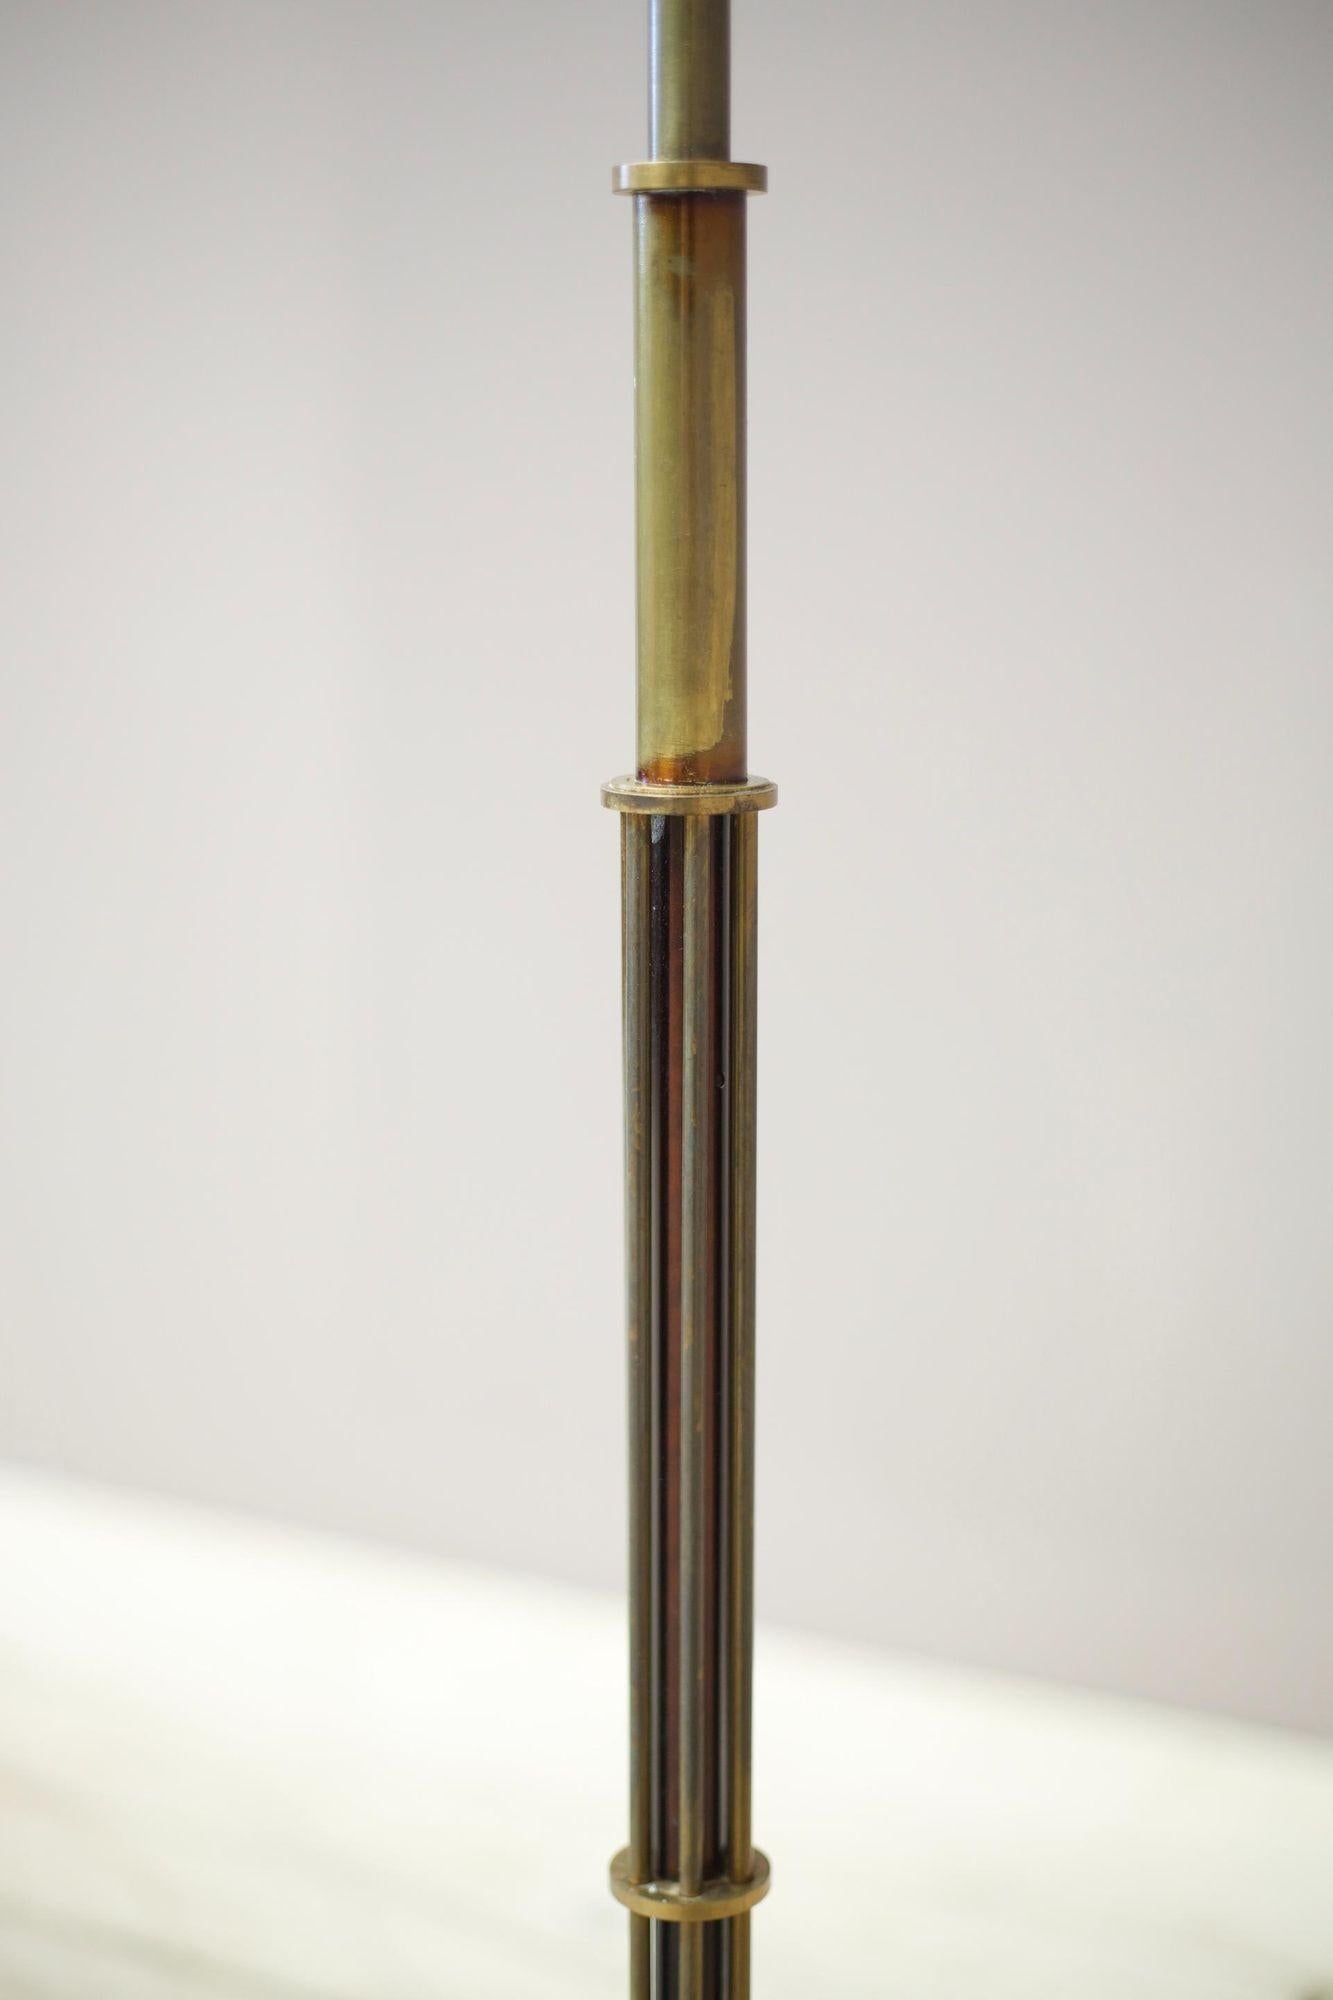 Midcentury Brass Atomic Floor Lamp In Excellent Condition For Sale In Malton, GB